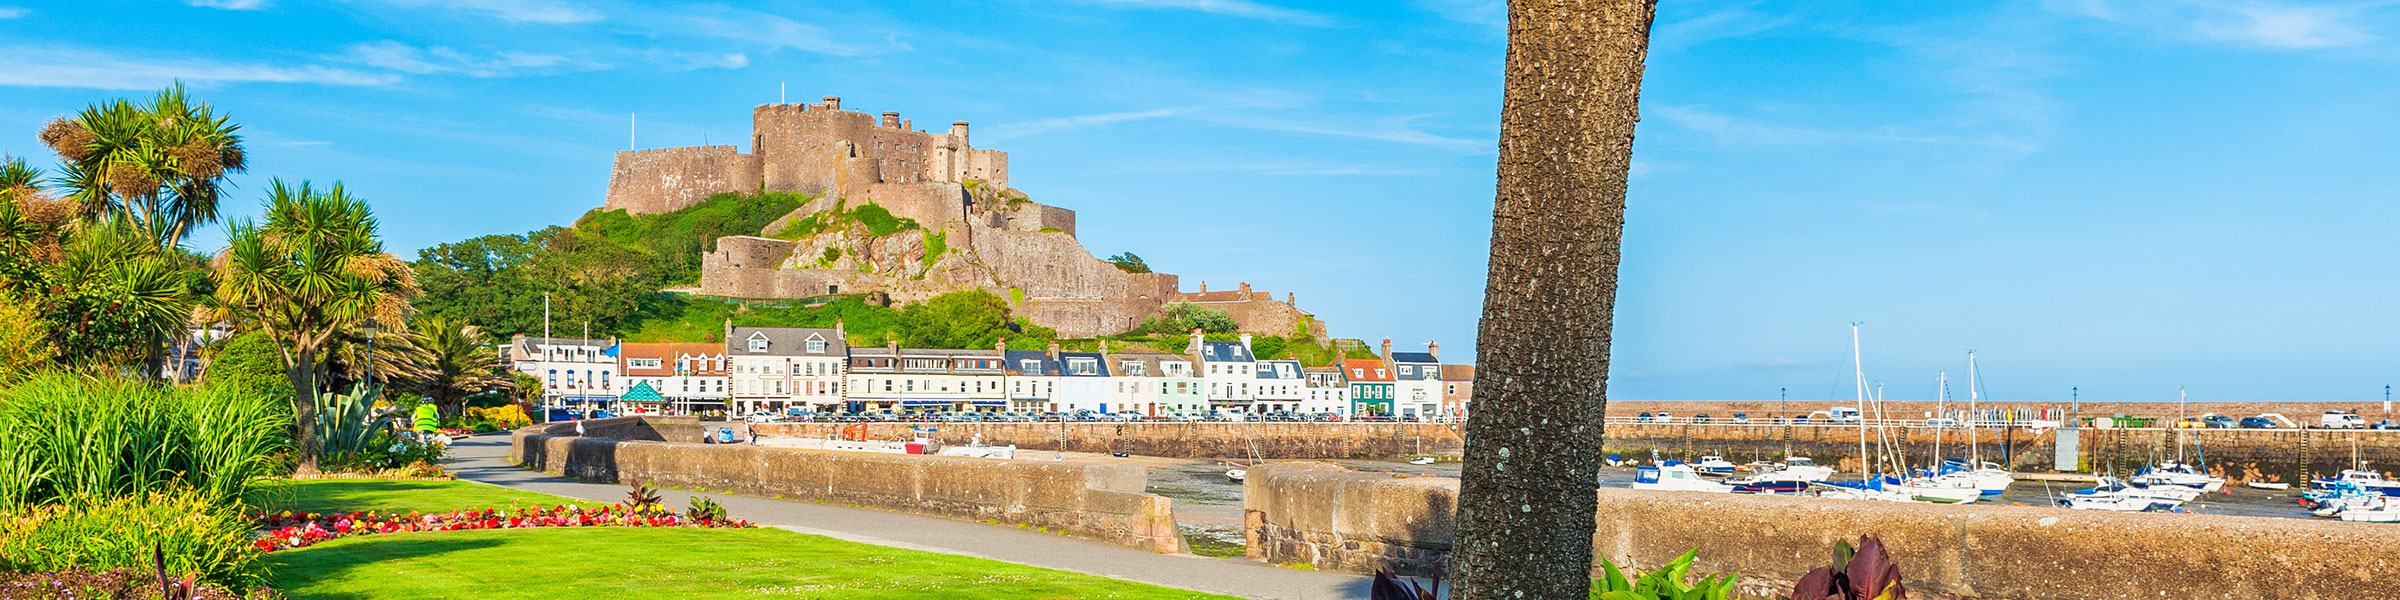 Gorey Castle and Harbour of Saint Martin, Jersey, Channel Islands